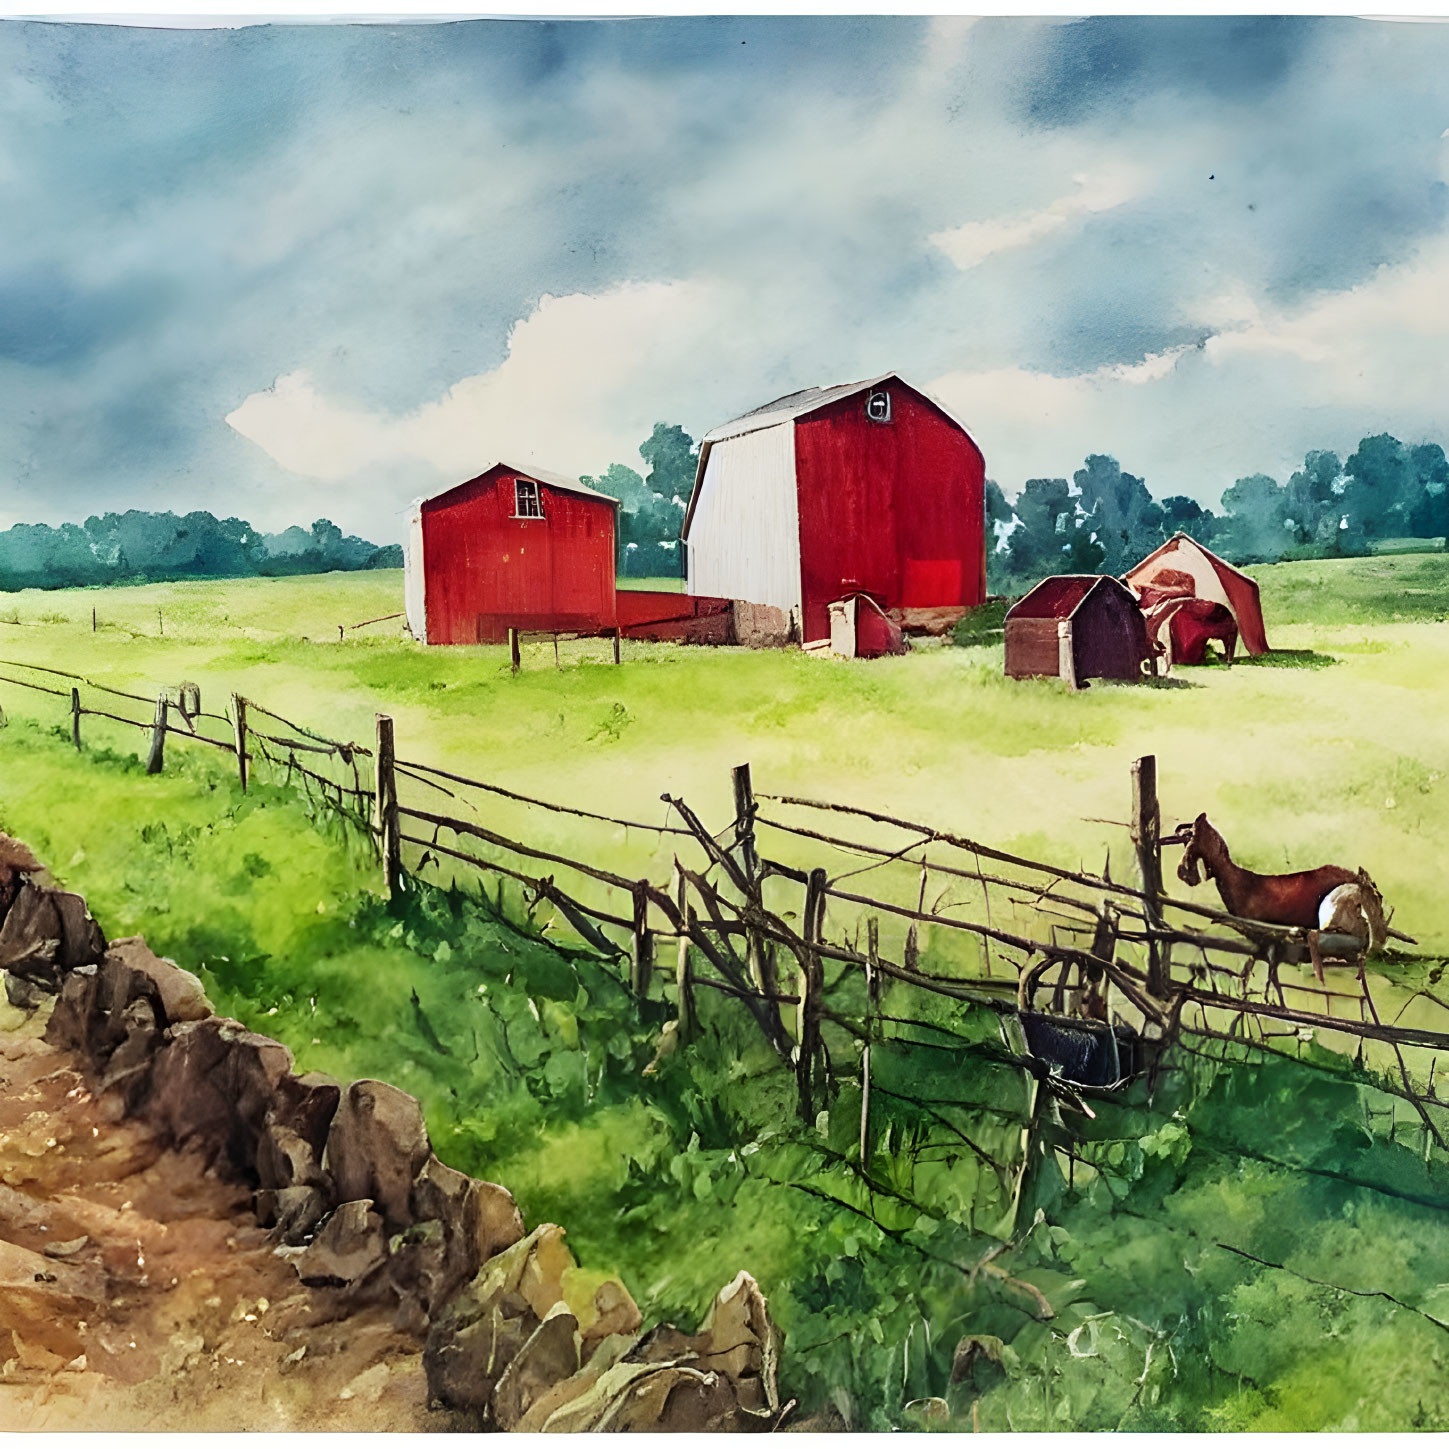 Rural watercolor painting: red barn, horse, stormy sky